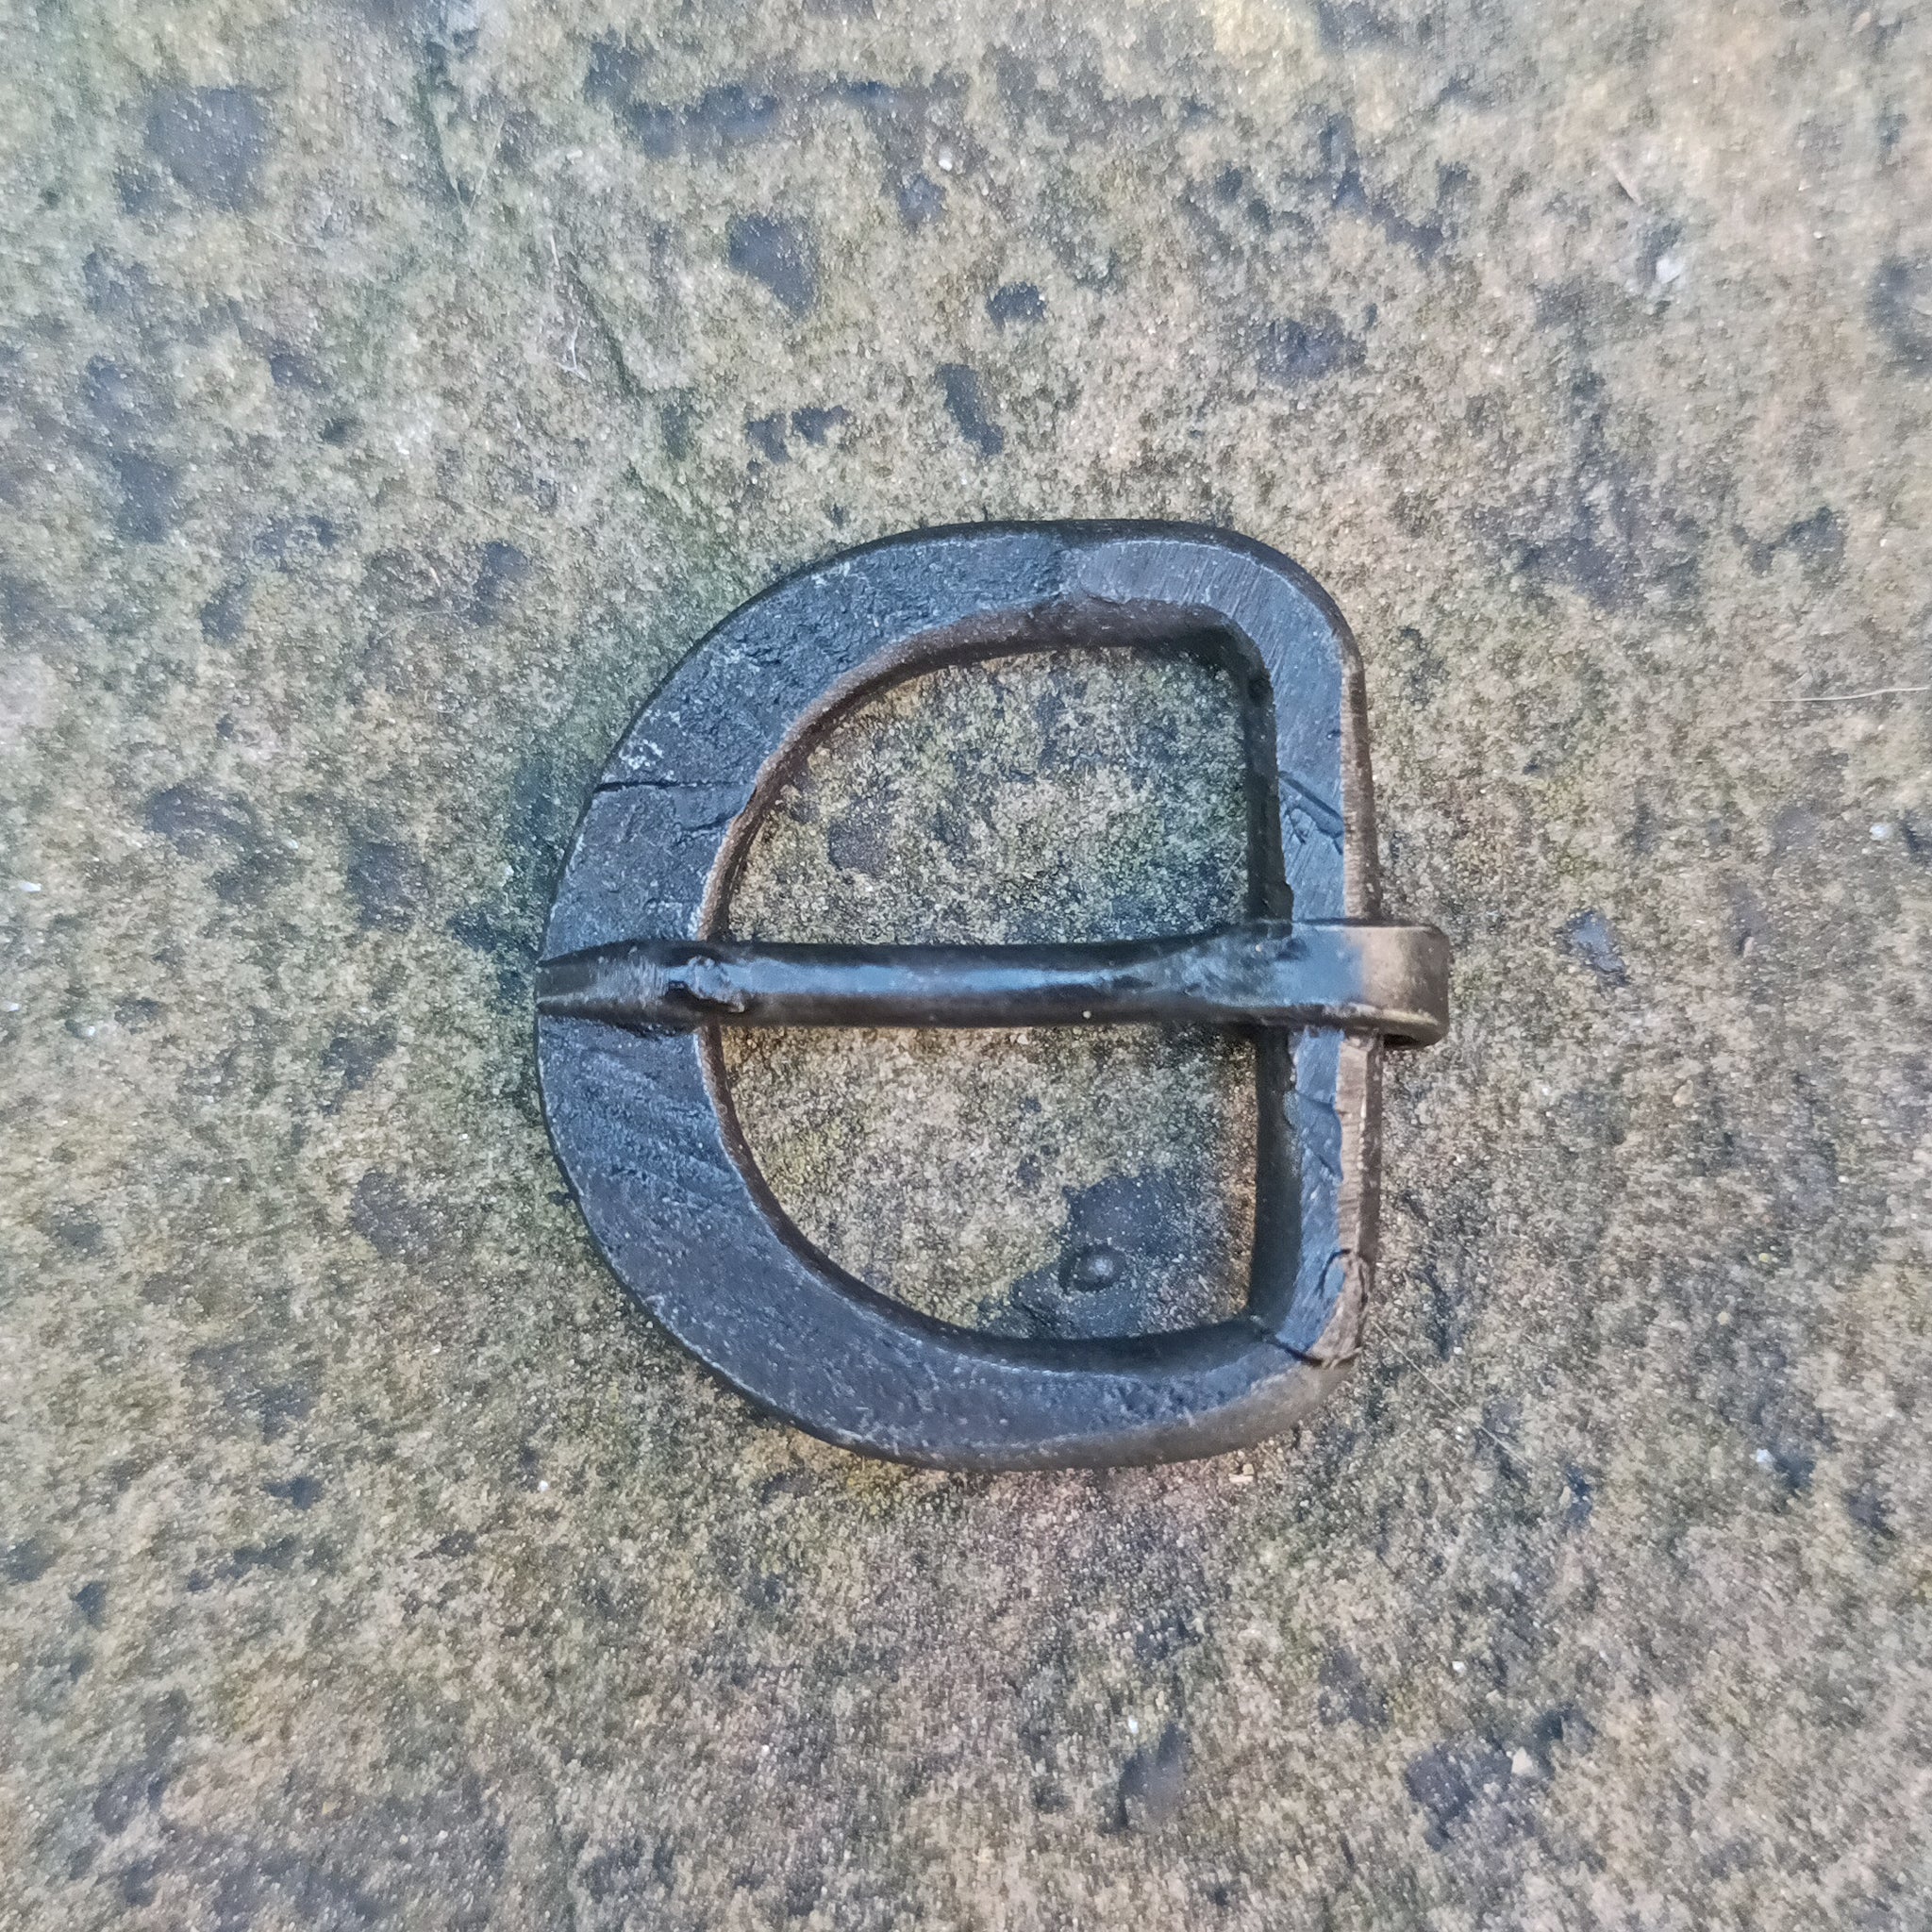 Hand-Forged Iron Viking / Medieval Buckle - 20mm (0.75 inch)